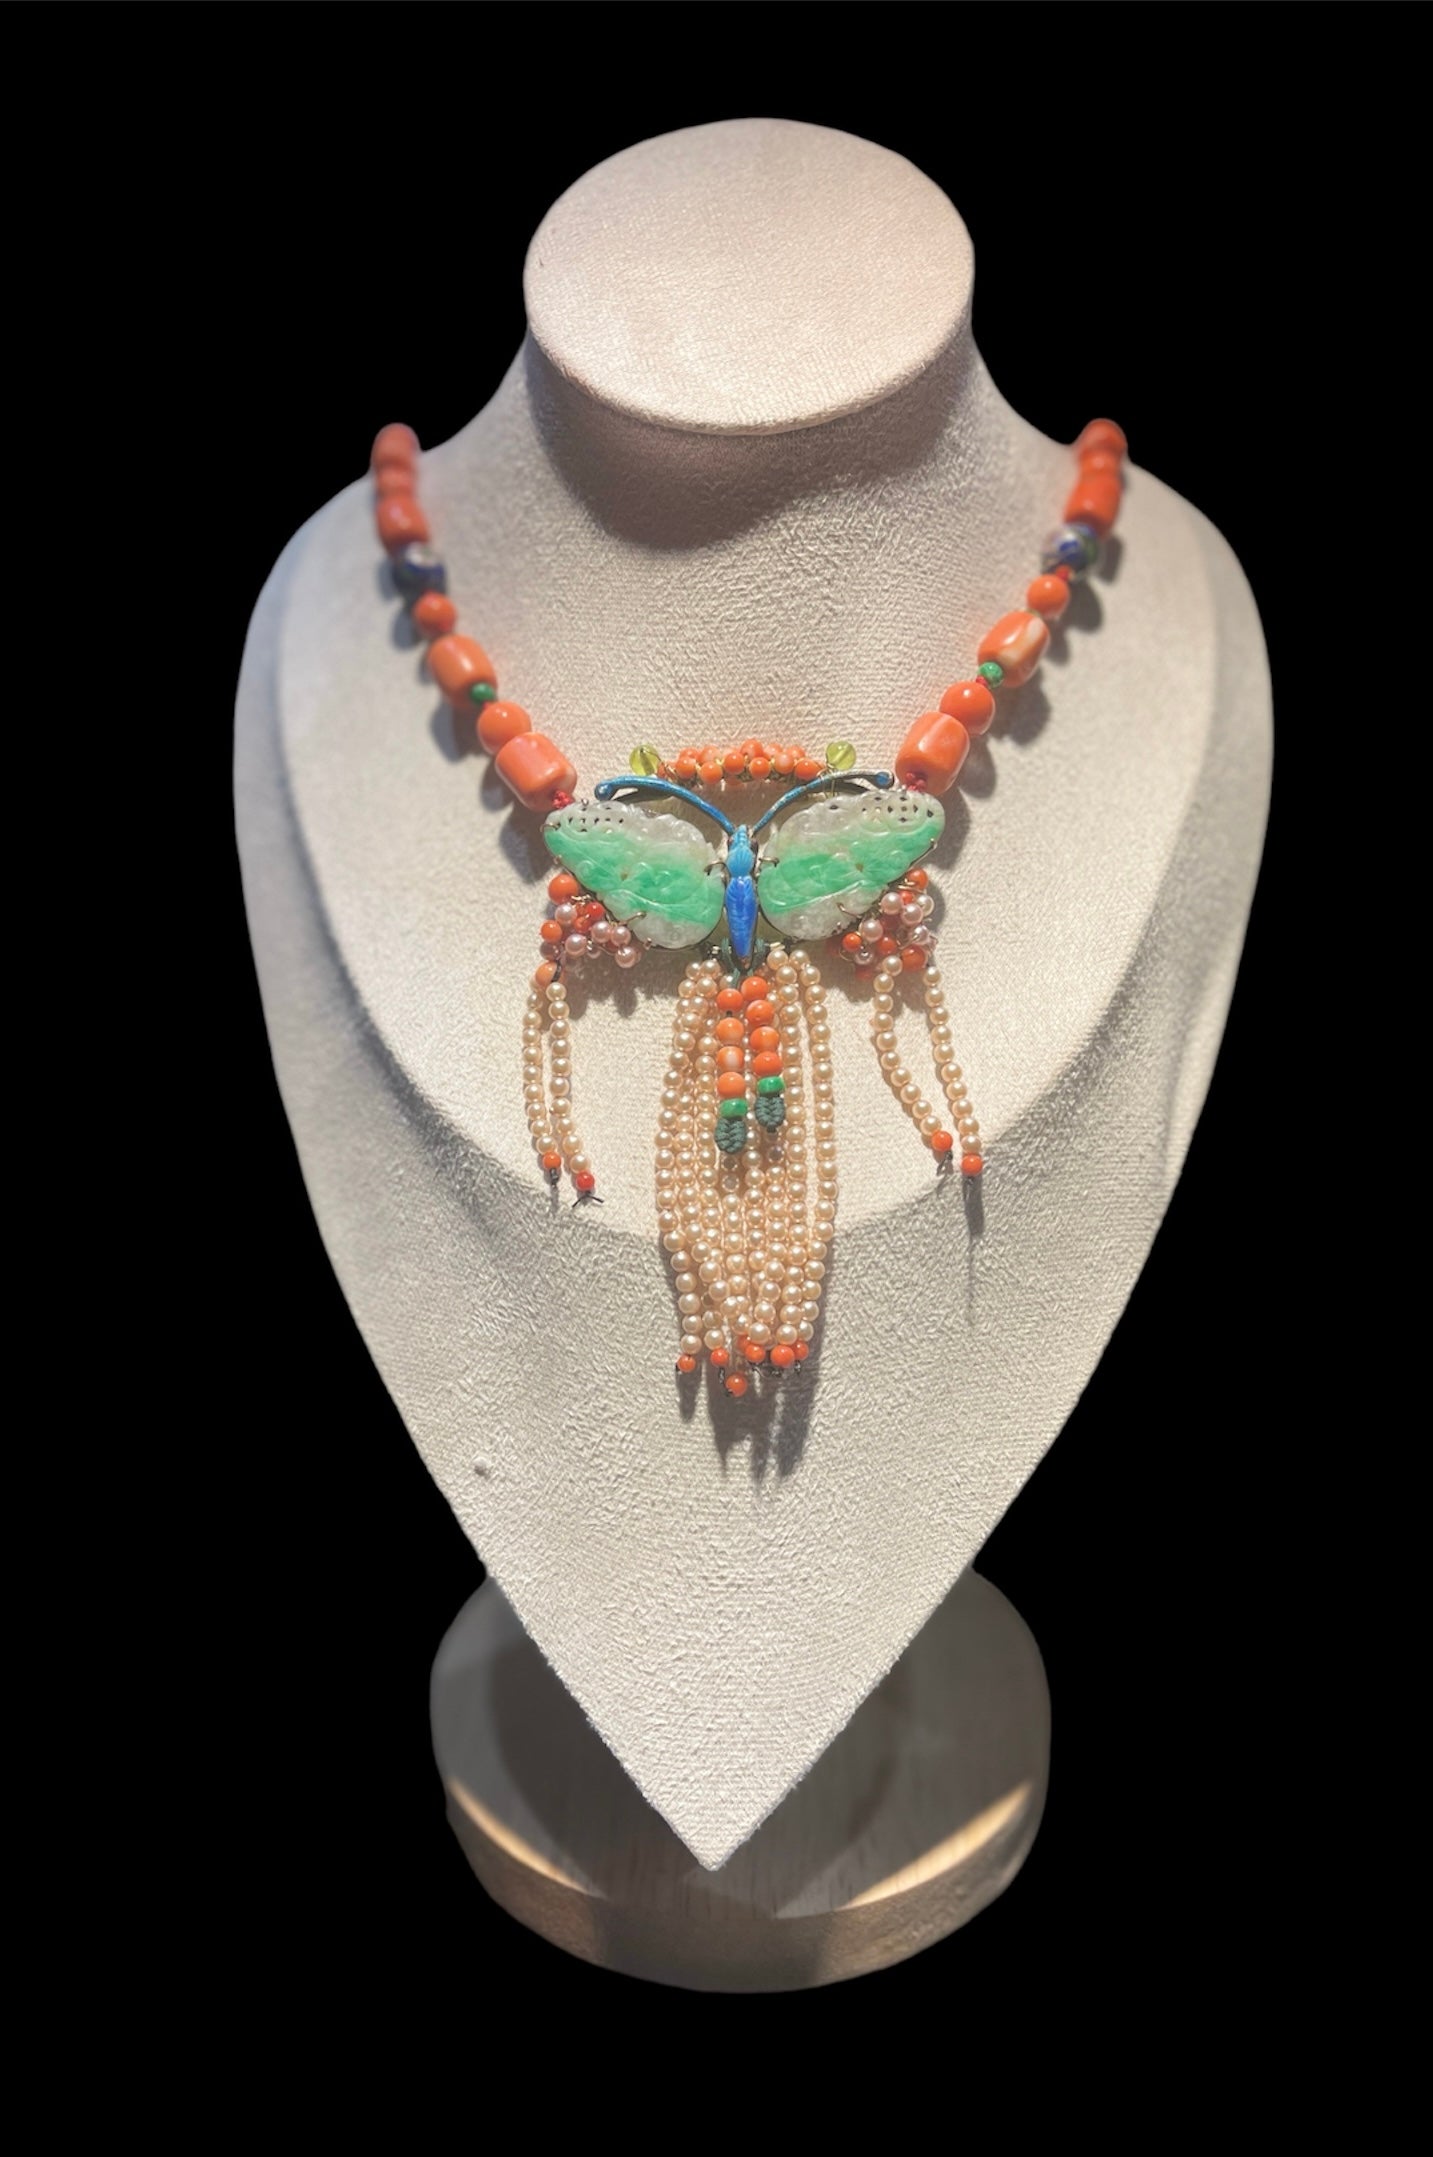 A jade butterfly pendant necklace with coral bead necklace